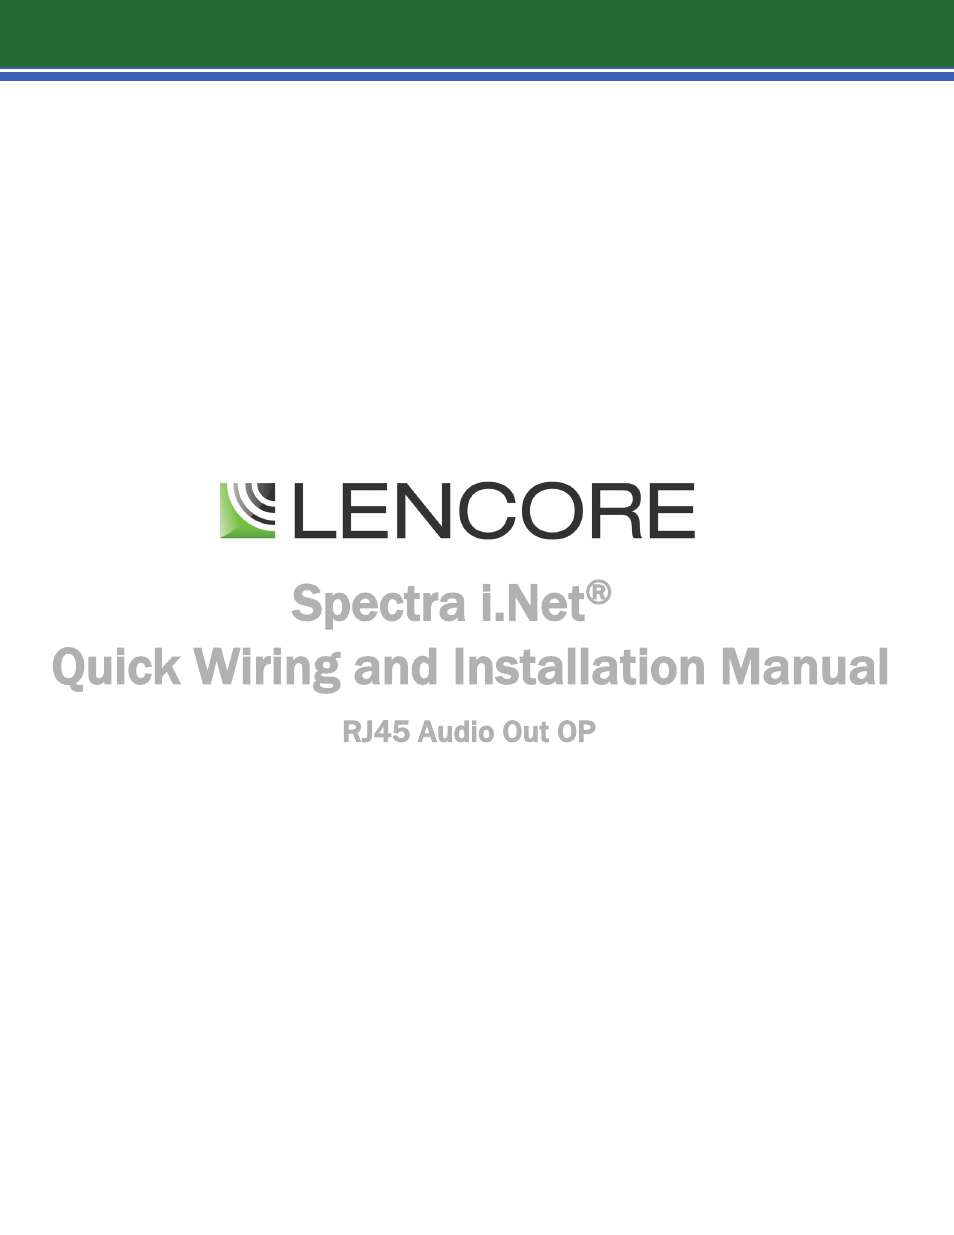 Spectra i.Net: Quick Installation Guide